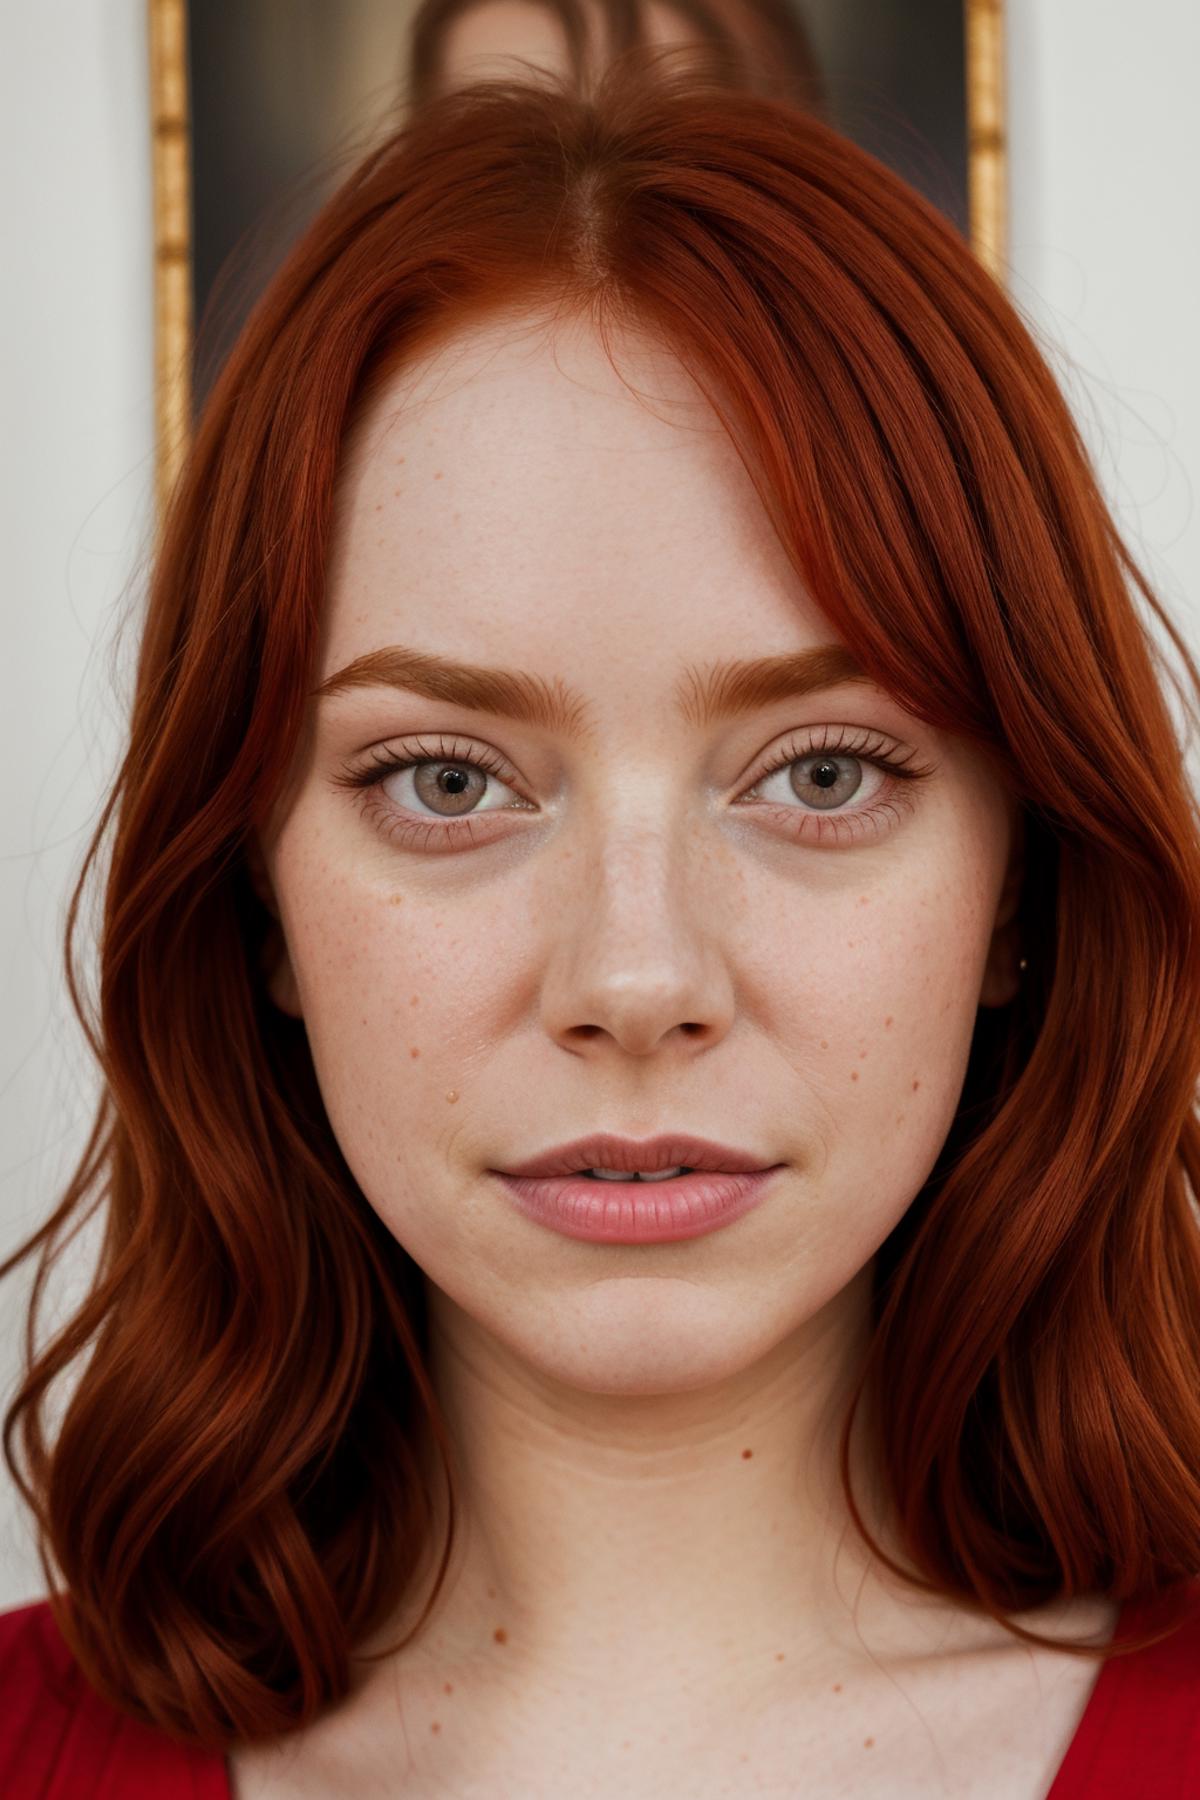 A close-up shot of a woman with red hair and green eyes.